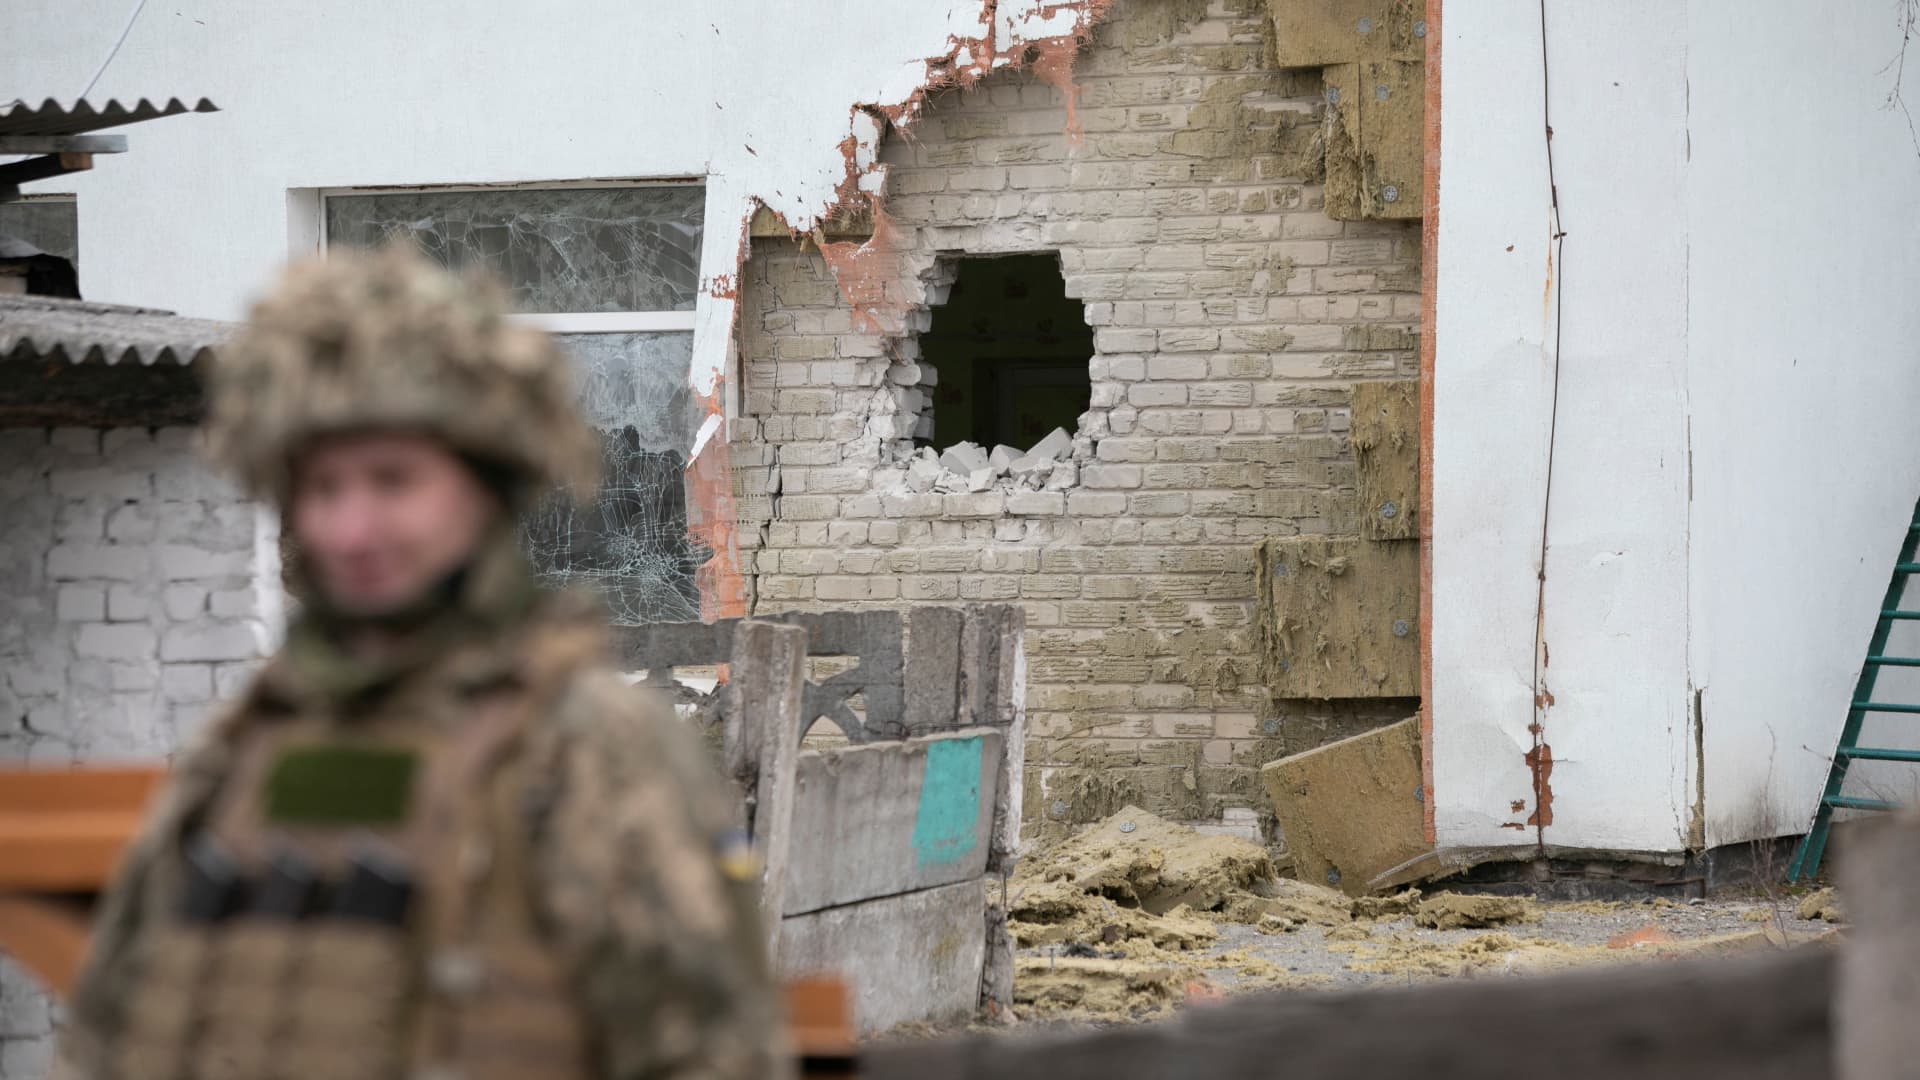 A Ukrainian soldier stands next to a damaged wall after the reported shelling of a kindergarten in the settlement of Stanytsia Luhanska, Ukraine, on February 17, 2022.